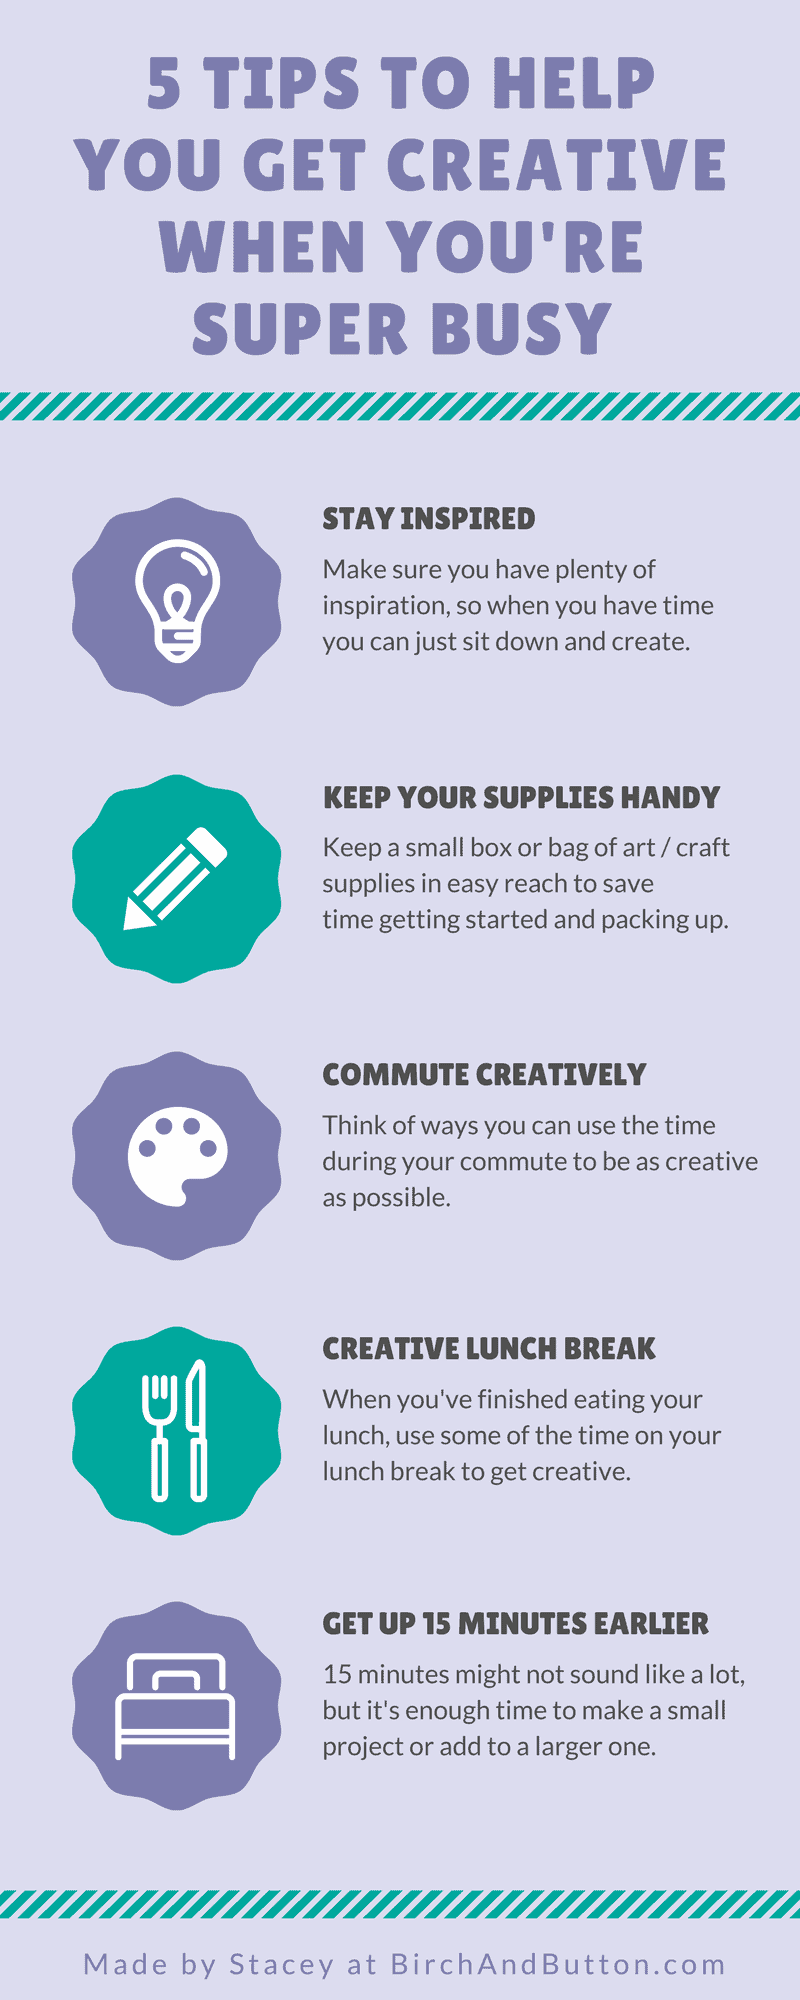 5 Tips To Help You Get Creative When You’re Busy - Birch & Button